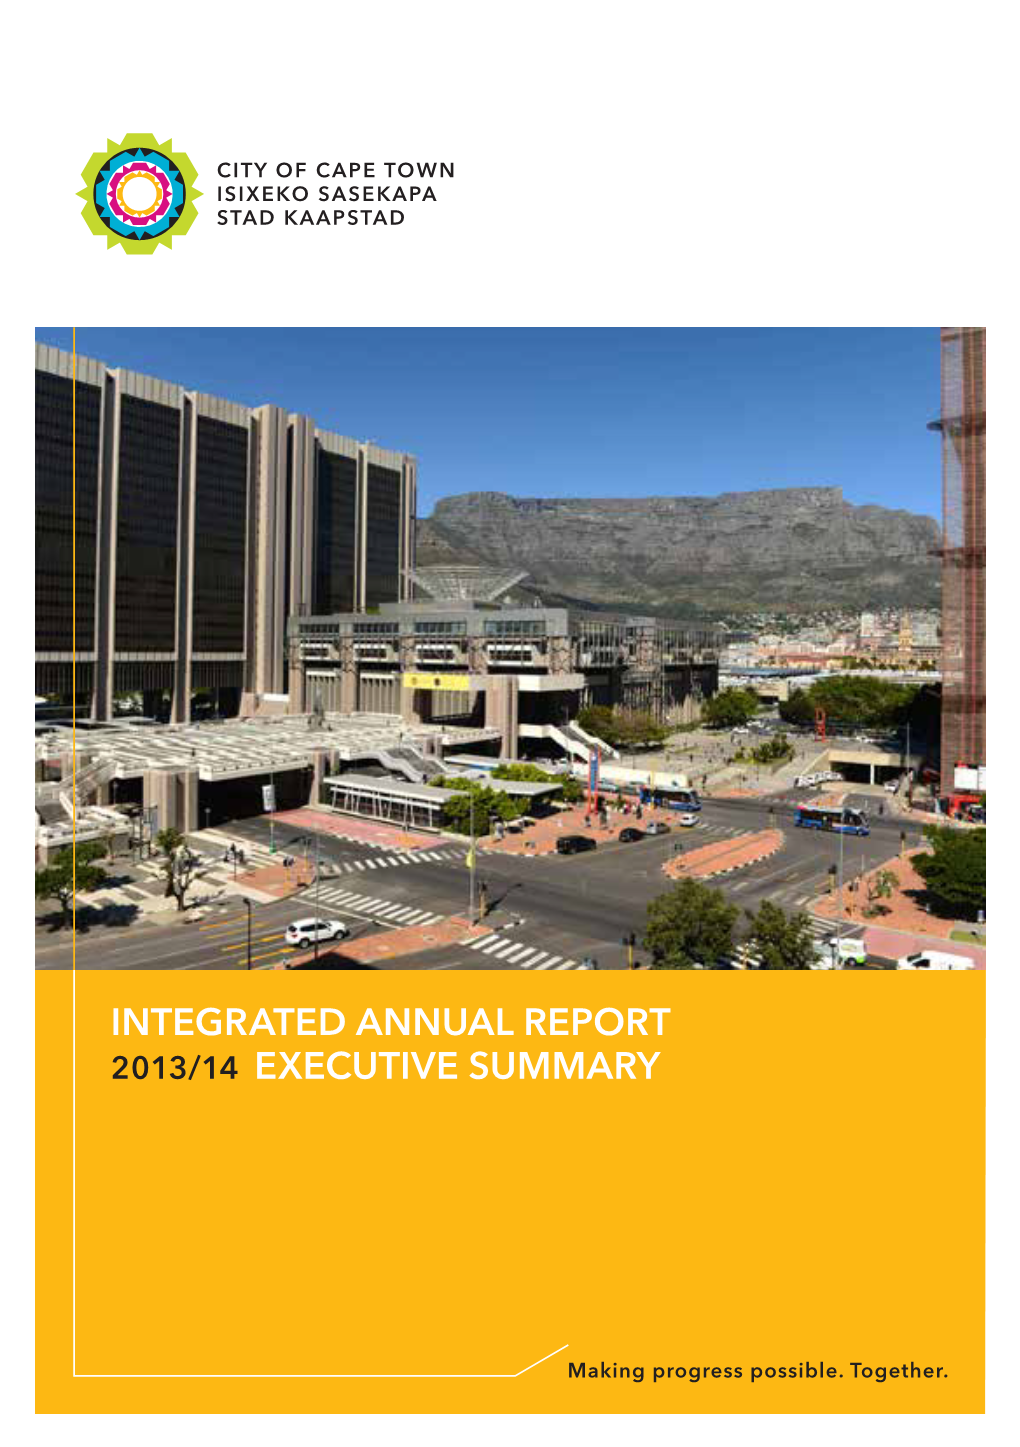 Integrated Annual Report 2013/14 Executive Summary